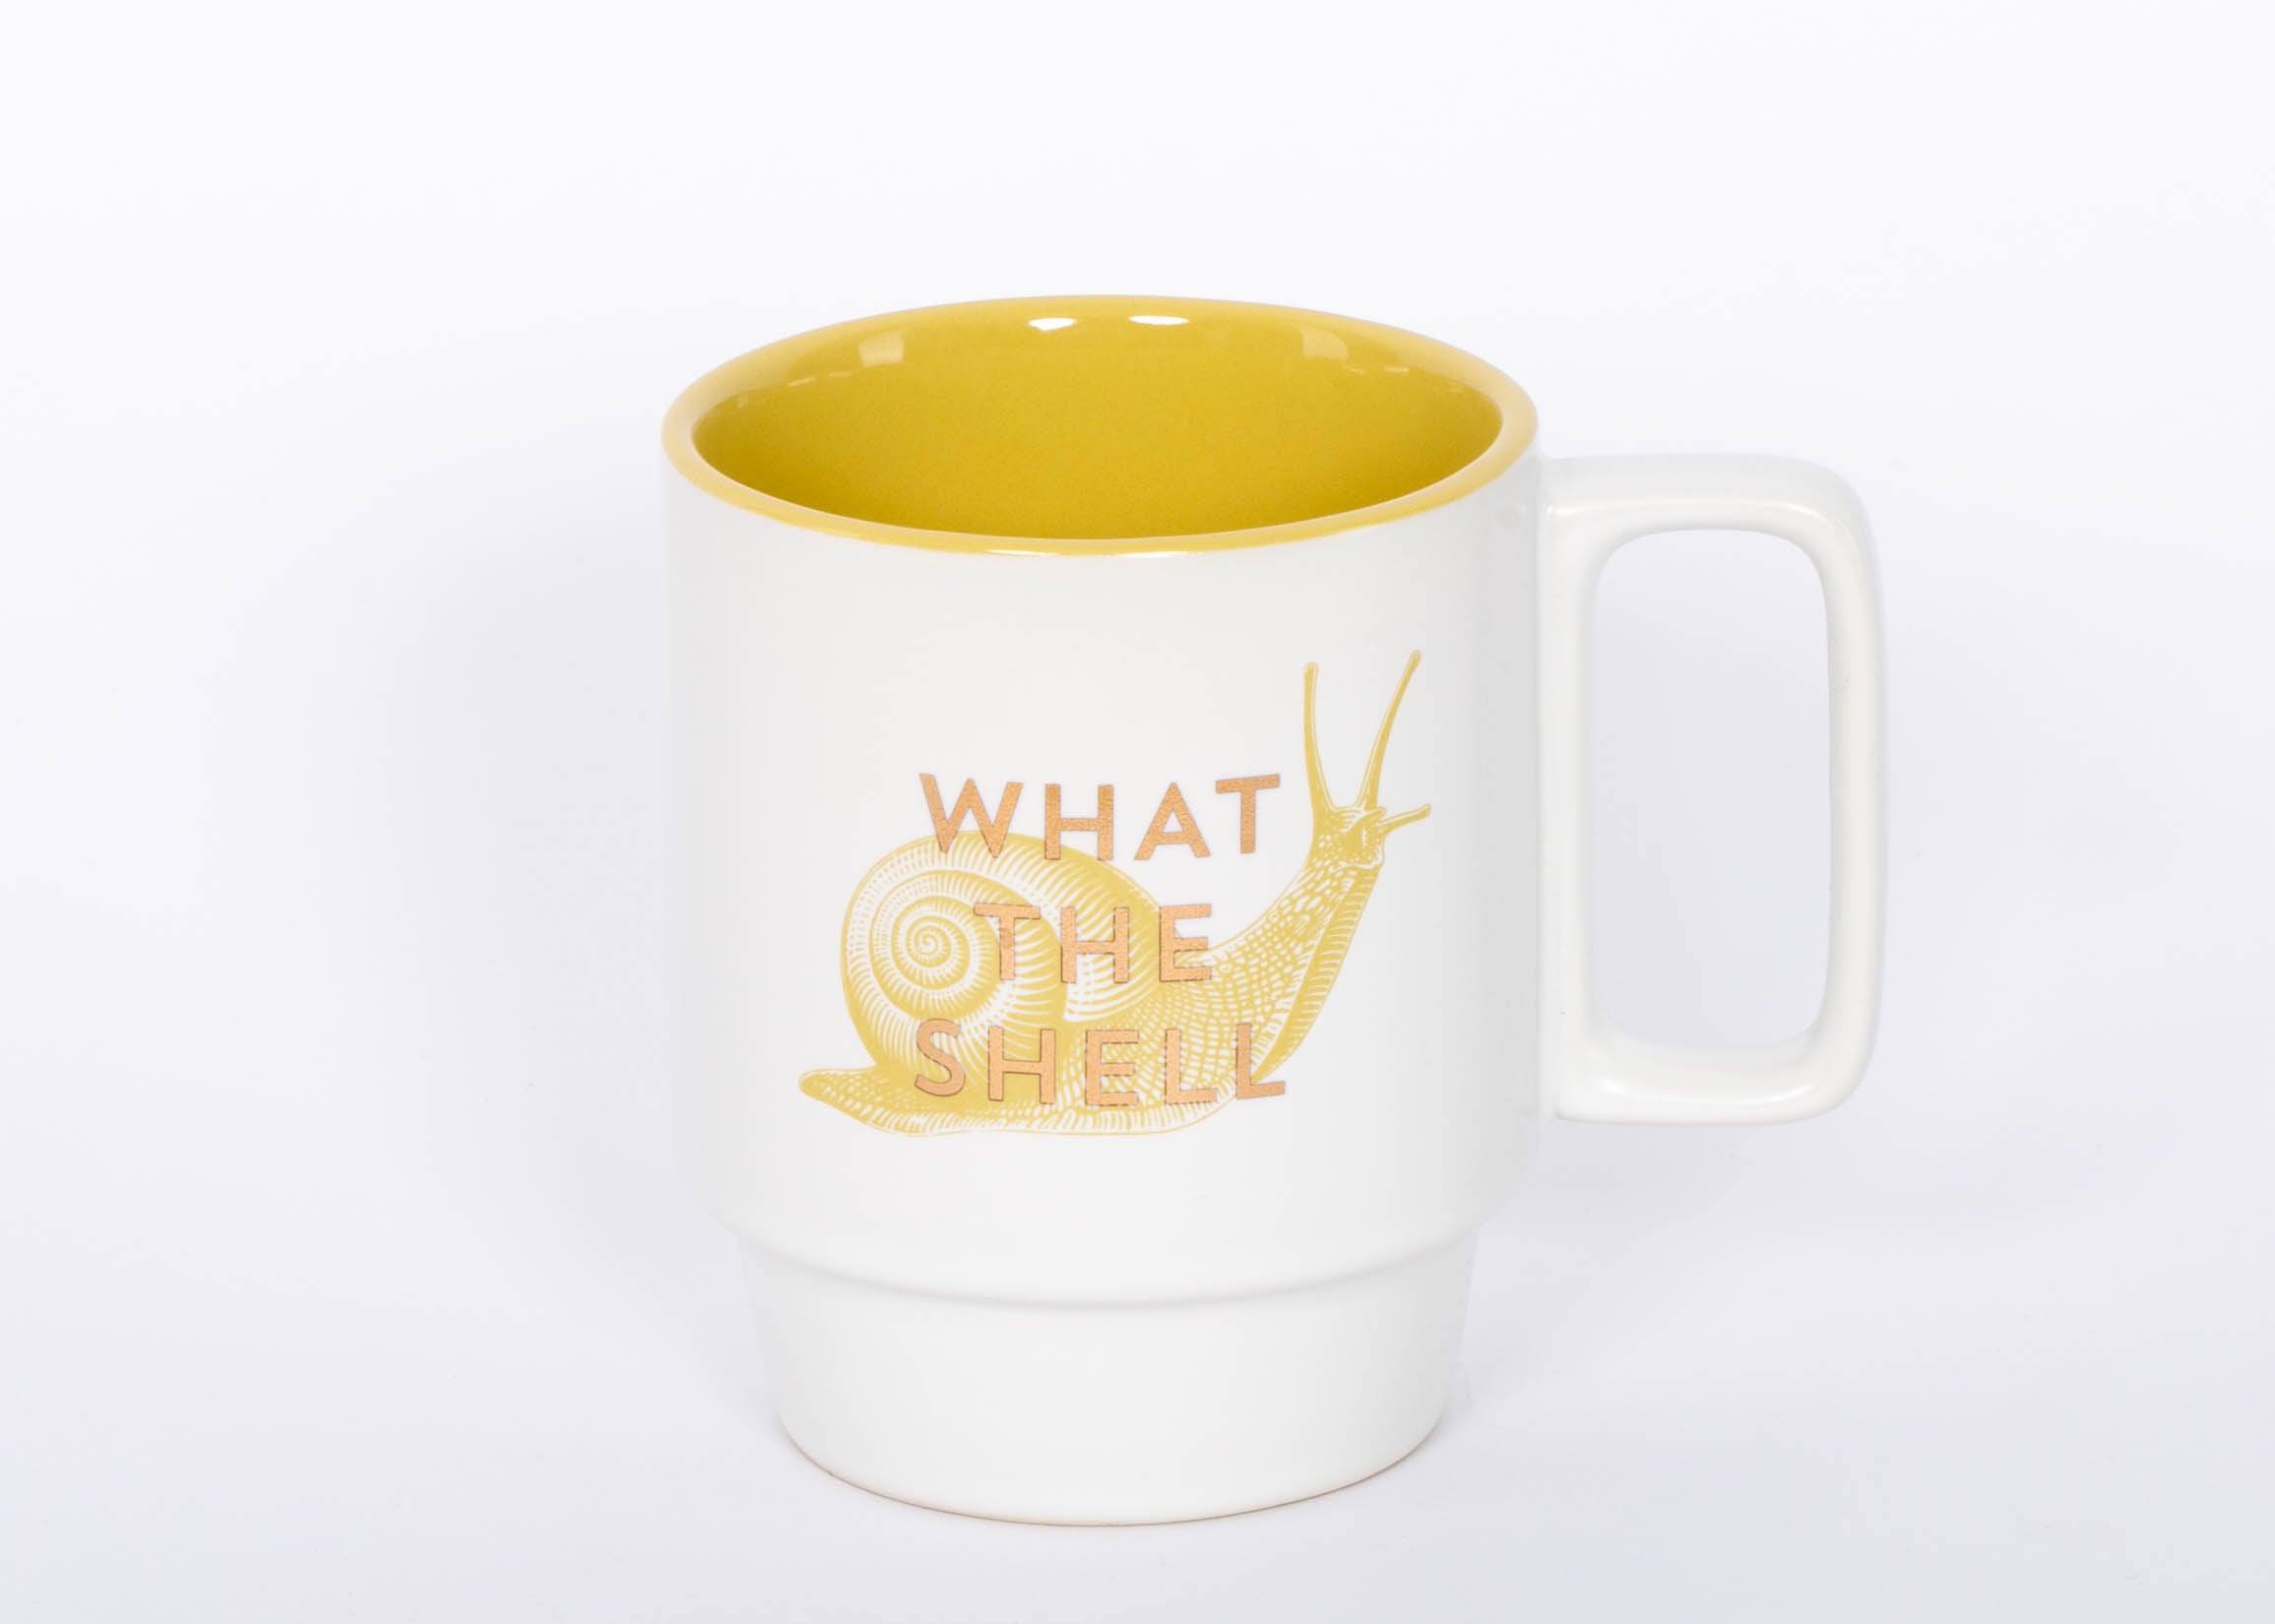 What the Shell Mug. This 12 oz. snail mug is the perfect companion to your morning routine whether it's for a cup of coffee, hot cocoa, or tea. It also makes a great gift for the witty friend or family member in your life!  3.25" D X 4.125" H 12 Oz Stackable Ceramic Mug Cute Snail Illustration Metallic Gold Foil Accent